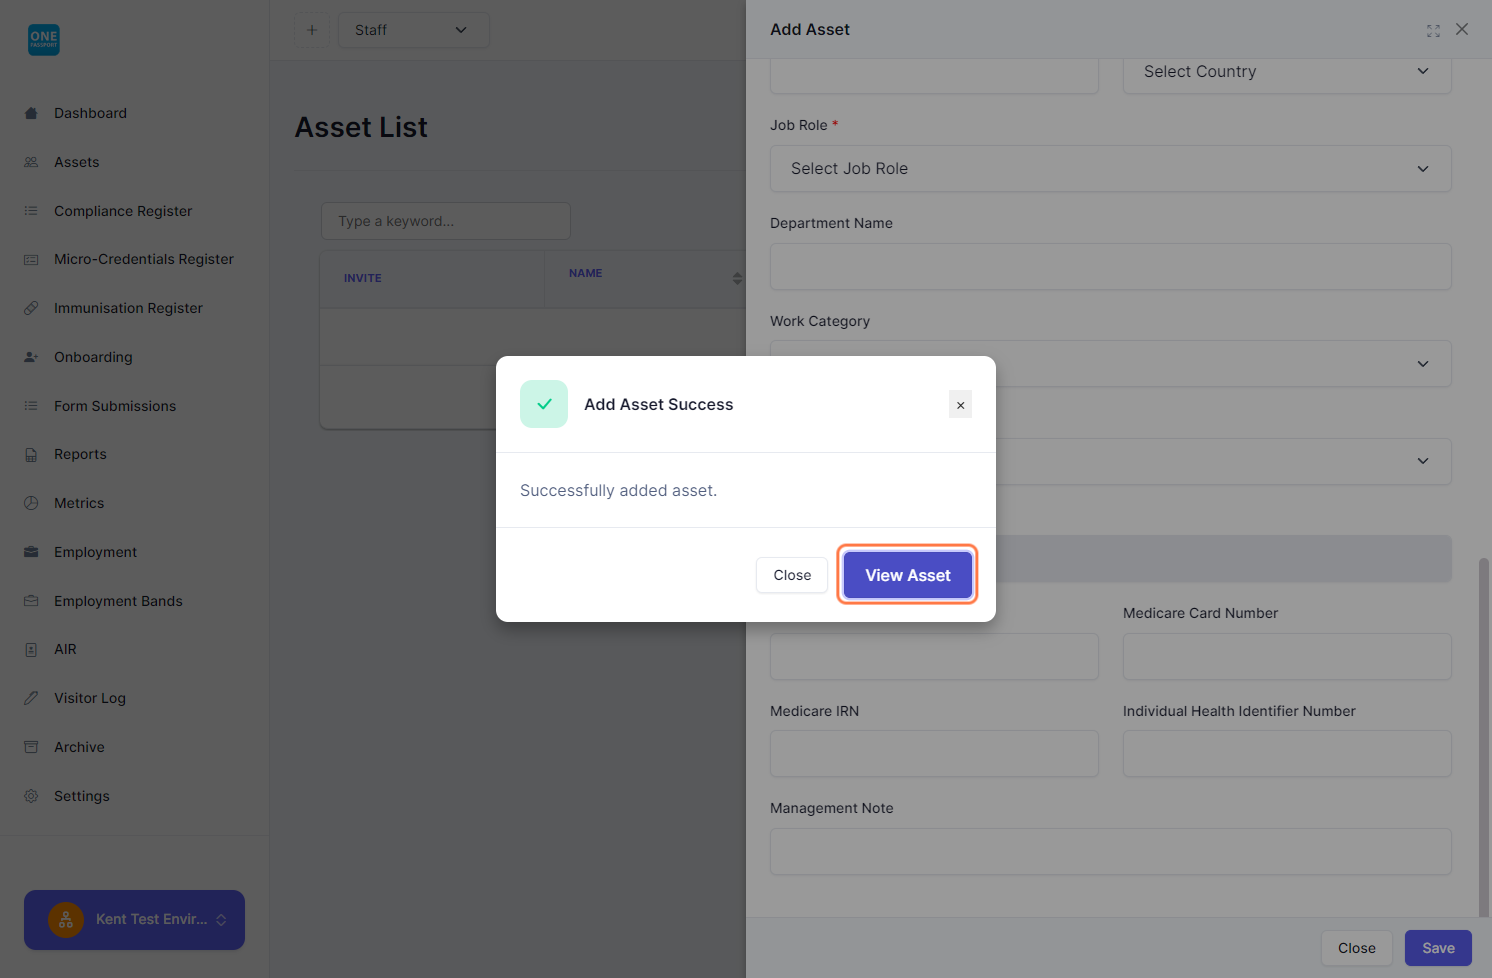 A pop-up will appear. Click View Asset or Close button.

Pressing close will lead you to the Asset list while view will redirect you to the Profile page of the asset/worker.